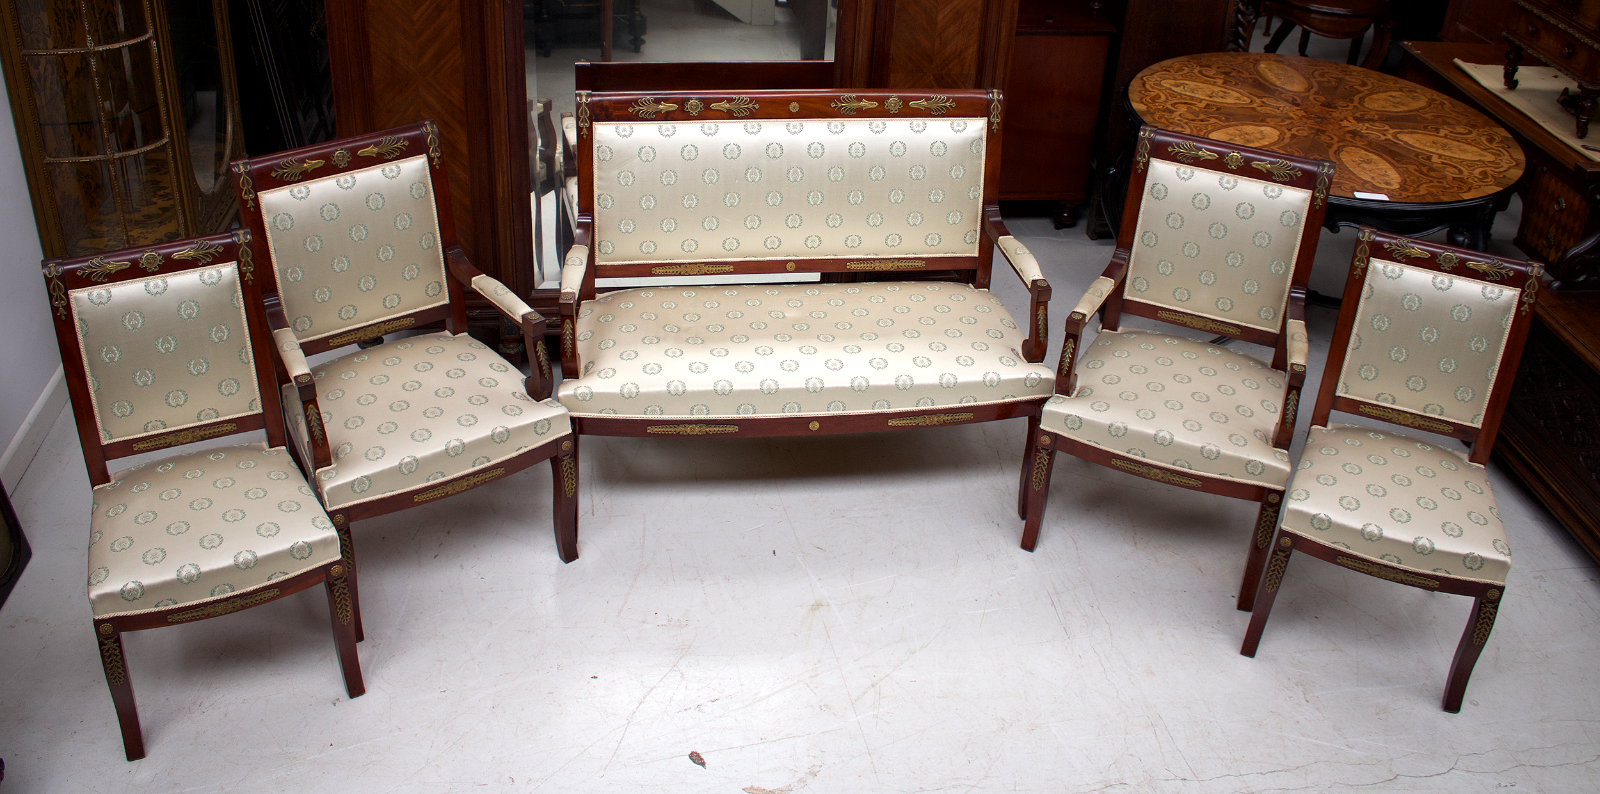 Antique Mahogany Empire Style Five Piece Suite Settee & Chairs